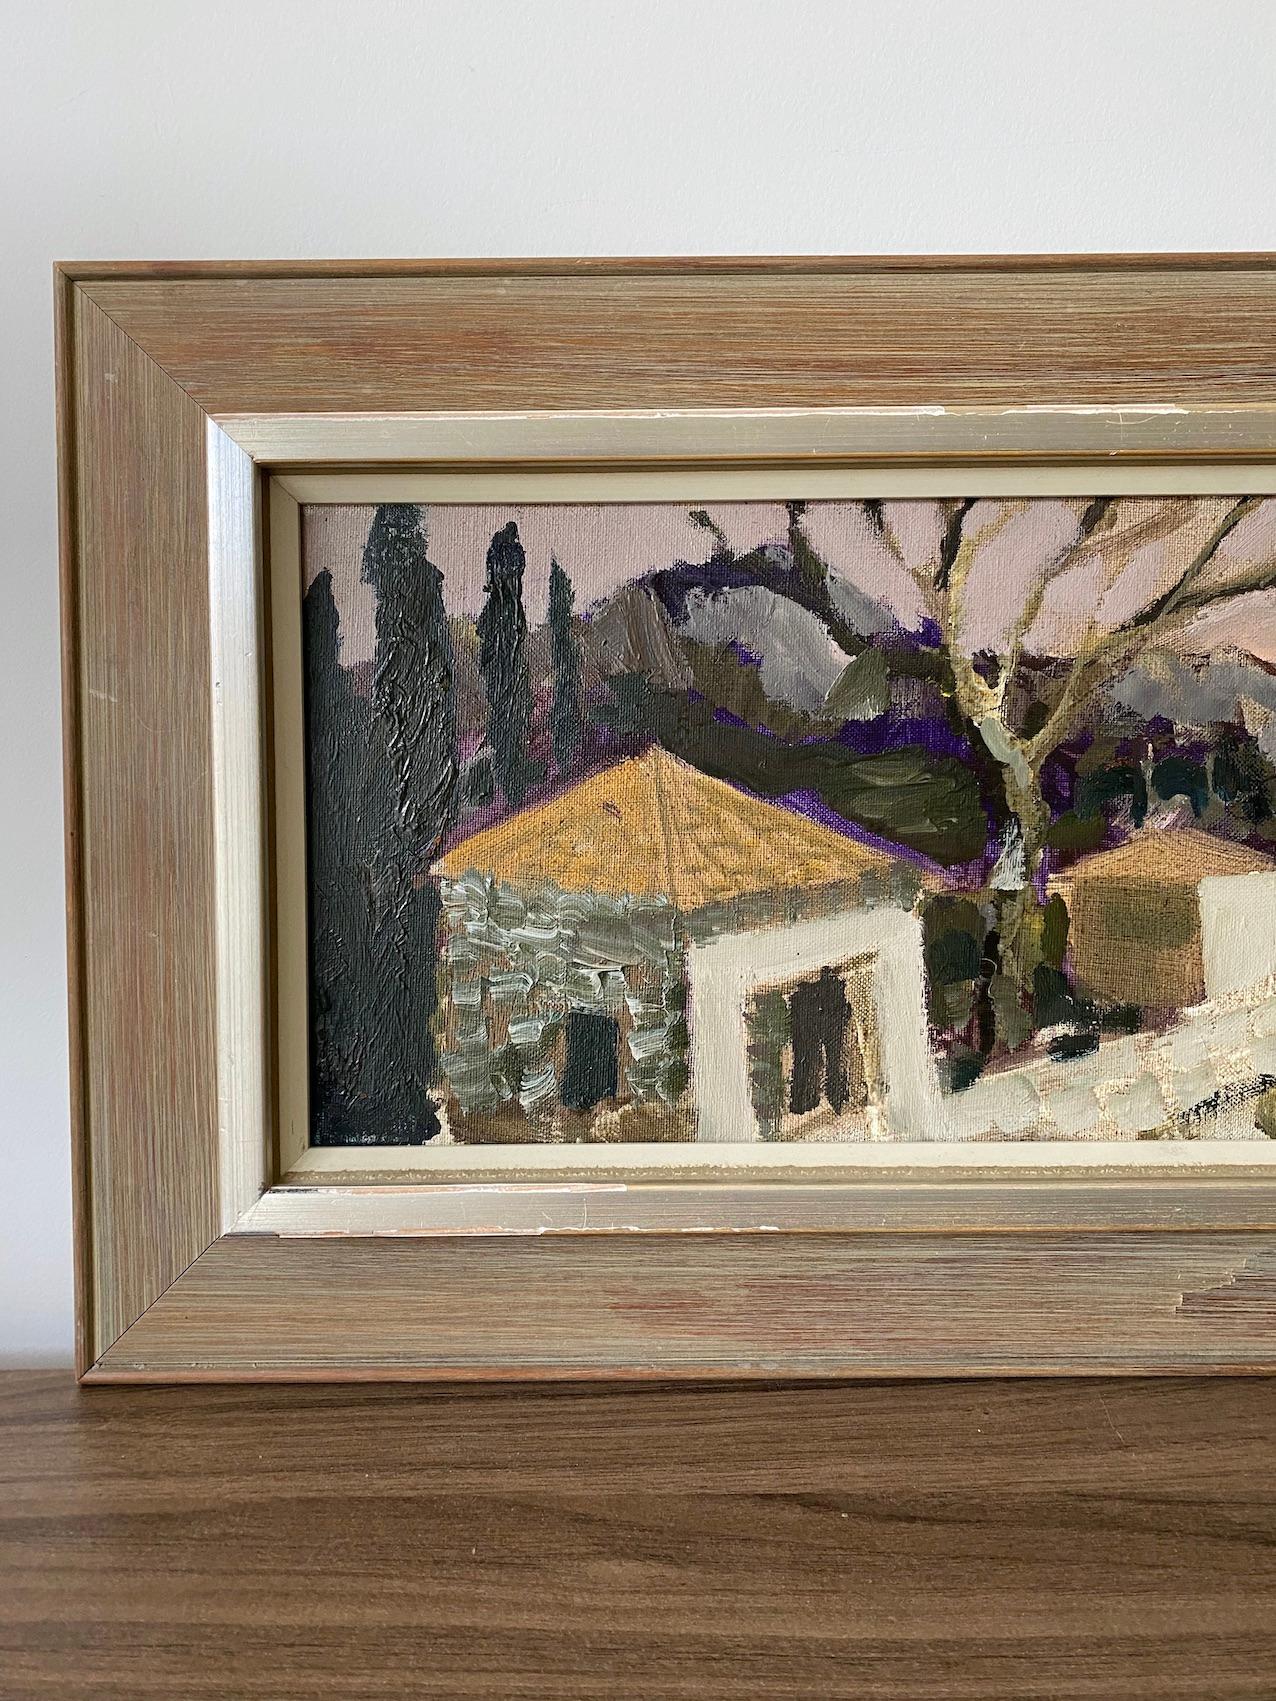 Sunset View
Size: 34.5 x 64 cm (including frame)
Oil on Canvas

A nostalgic mid century landscape in oil, painted onto canvas.

A row of small houses sit atop mountains looking over the landscape. A tree punctuates the middle of the foreground,